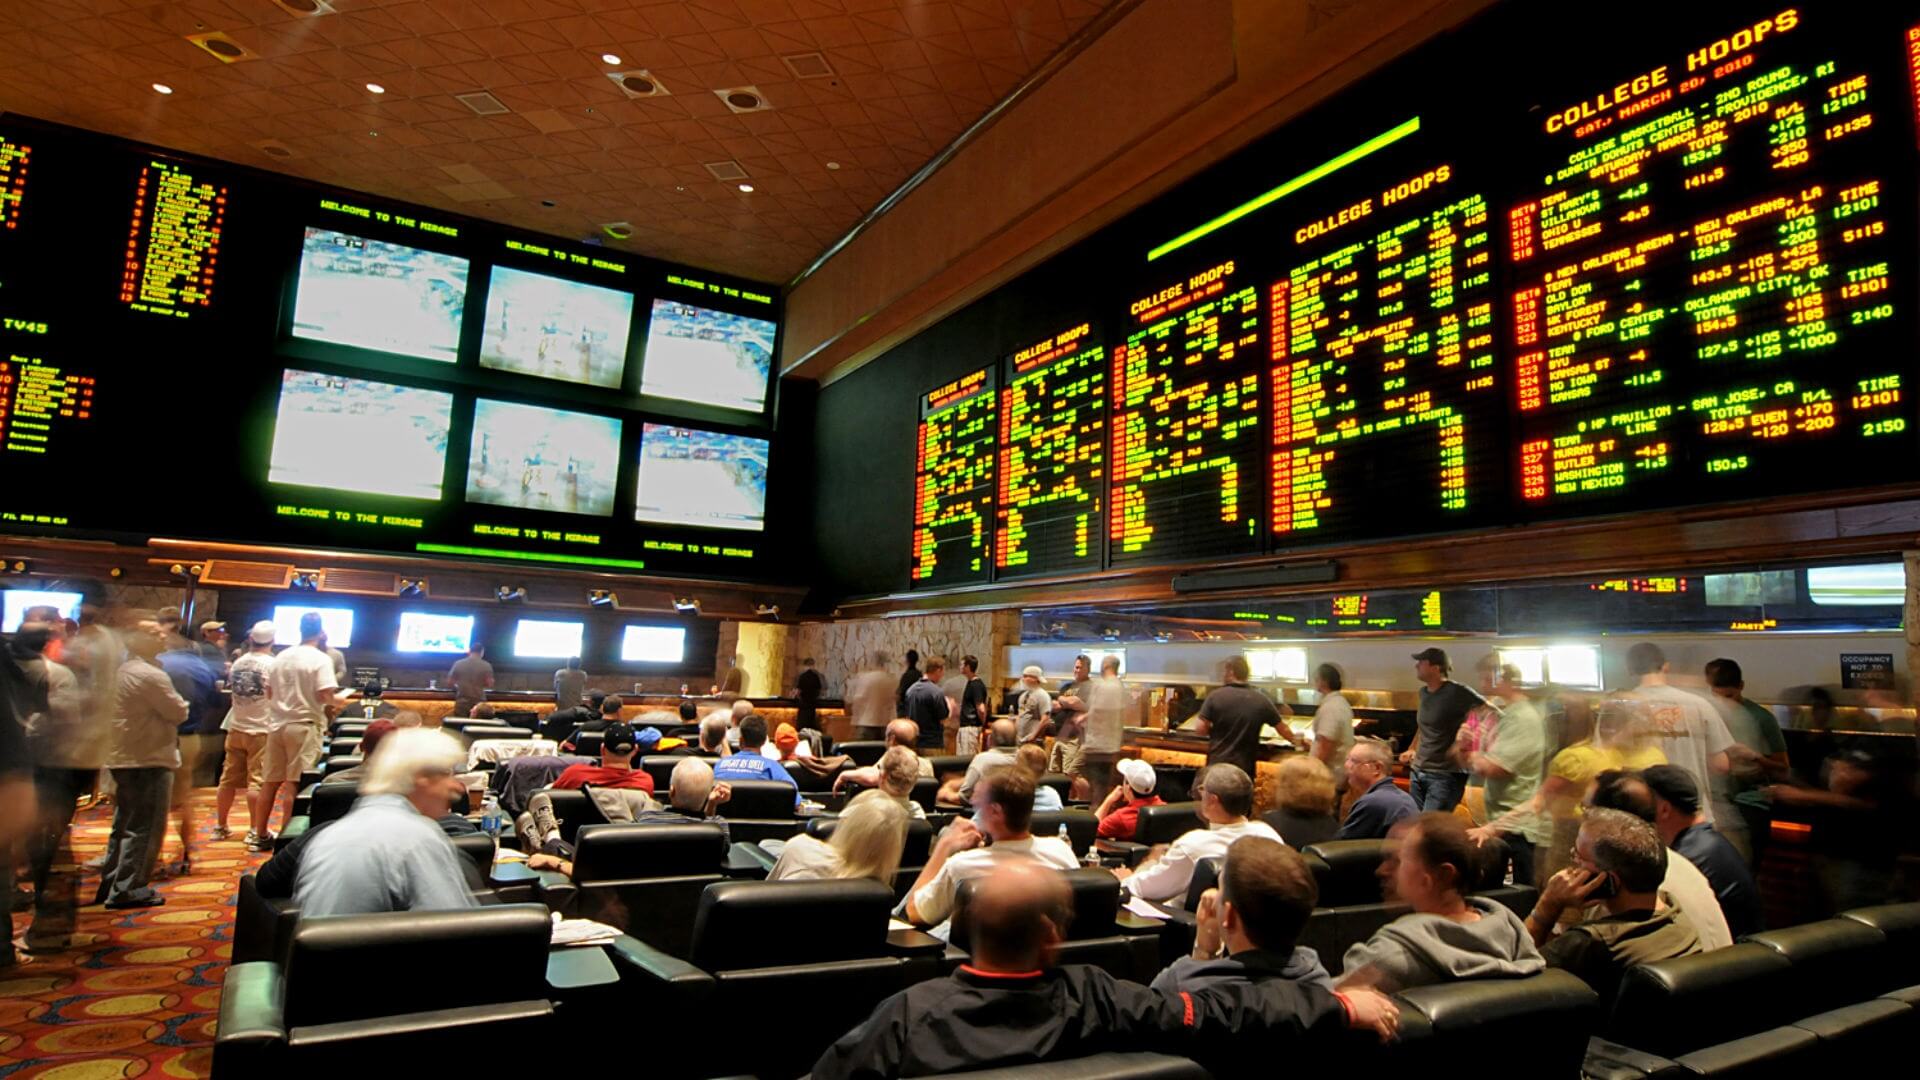 Fantasy Sports Betting - A Beginner's Guide